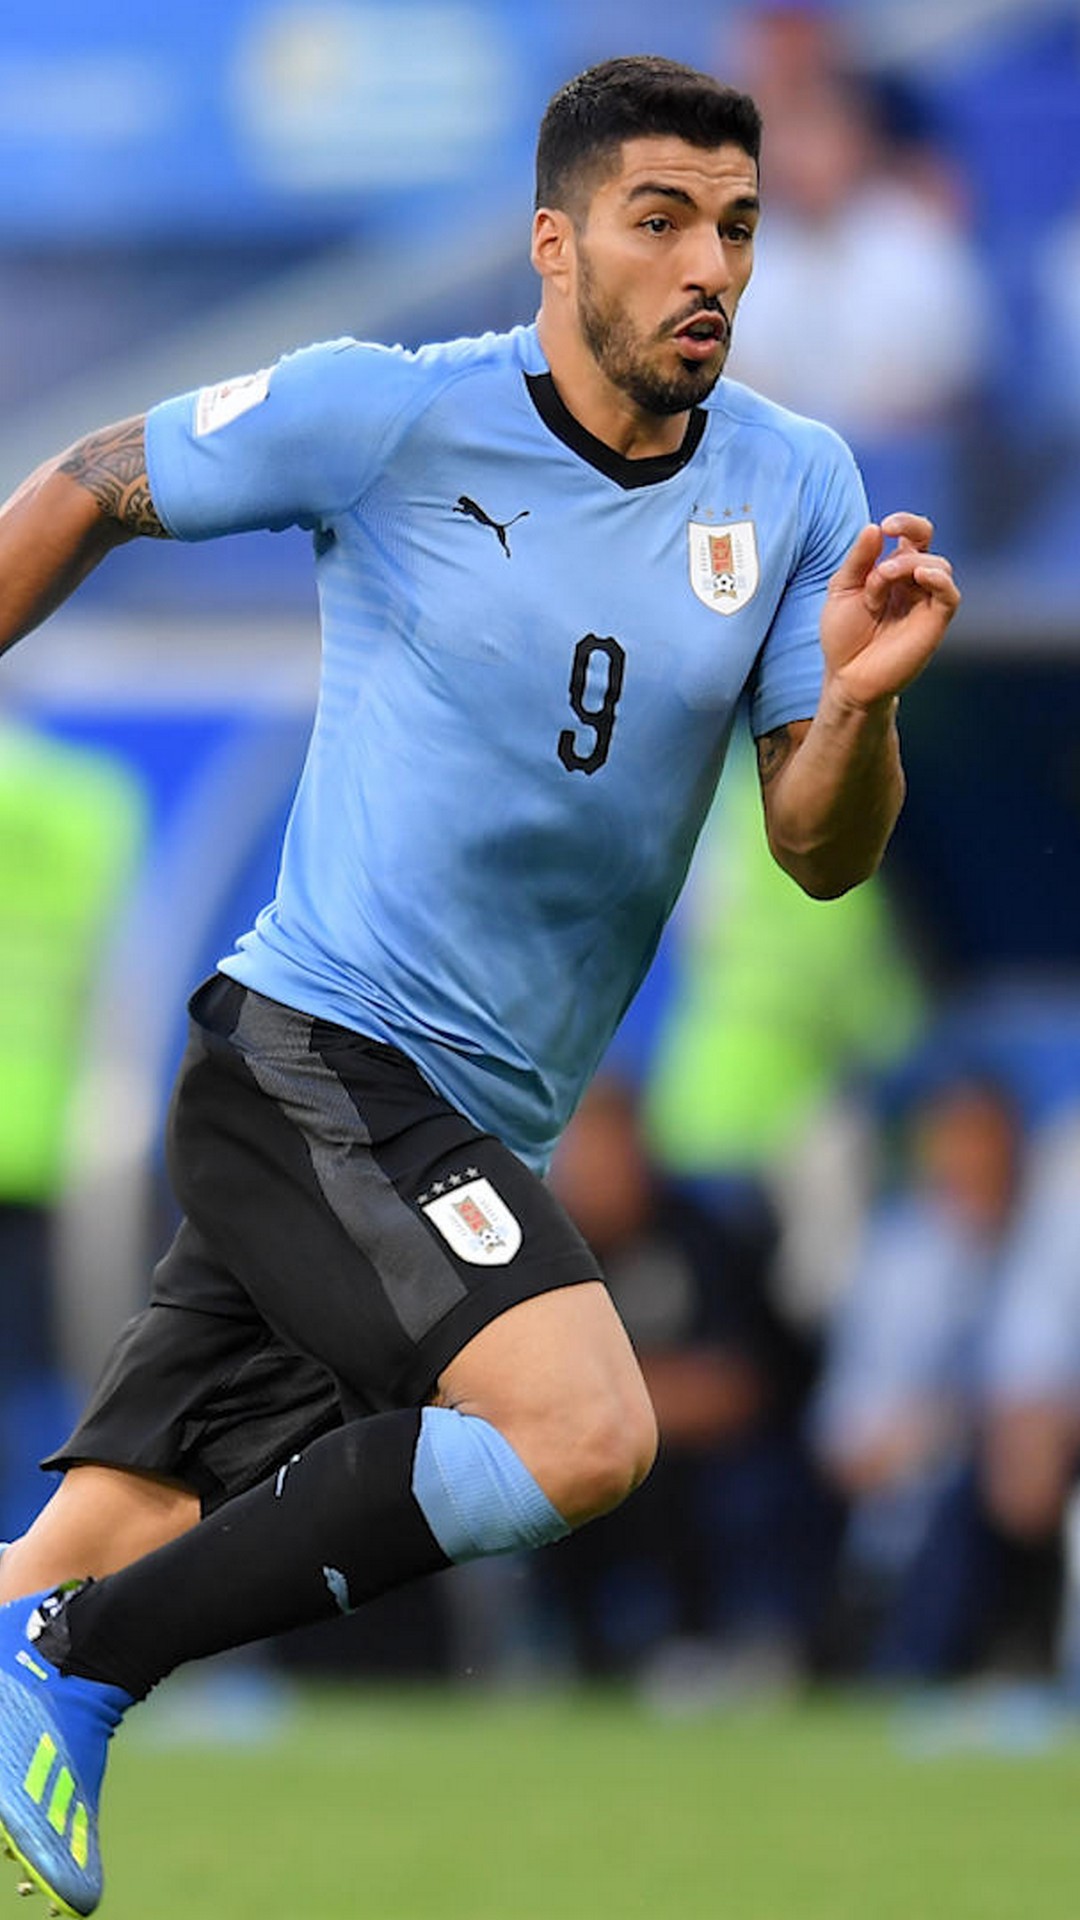 Luis Suarez Uruguay Wallpaper For Android with image resolution 1080x1920 pixel. You can make this wallpaper for your Android backgrounds, Tablet, Smartphones Screensavers and Mobile Phone Lock Screen